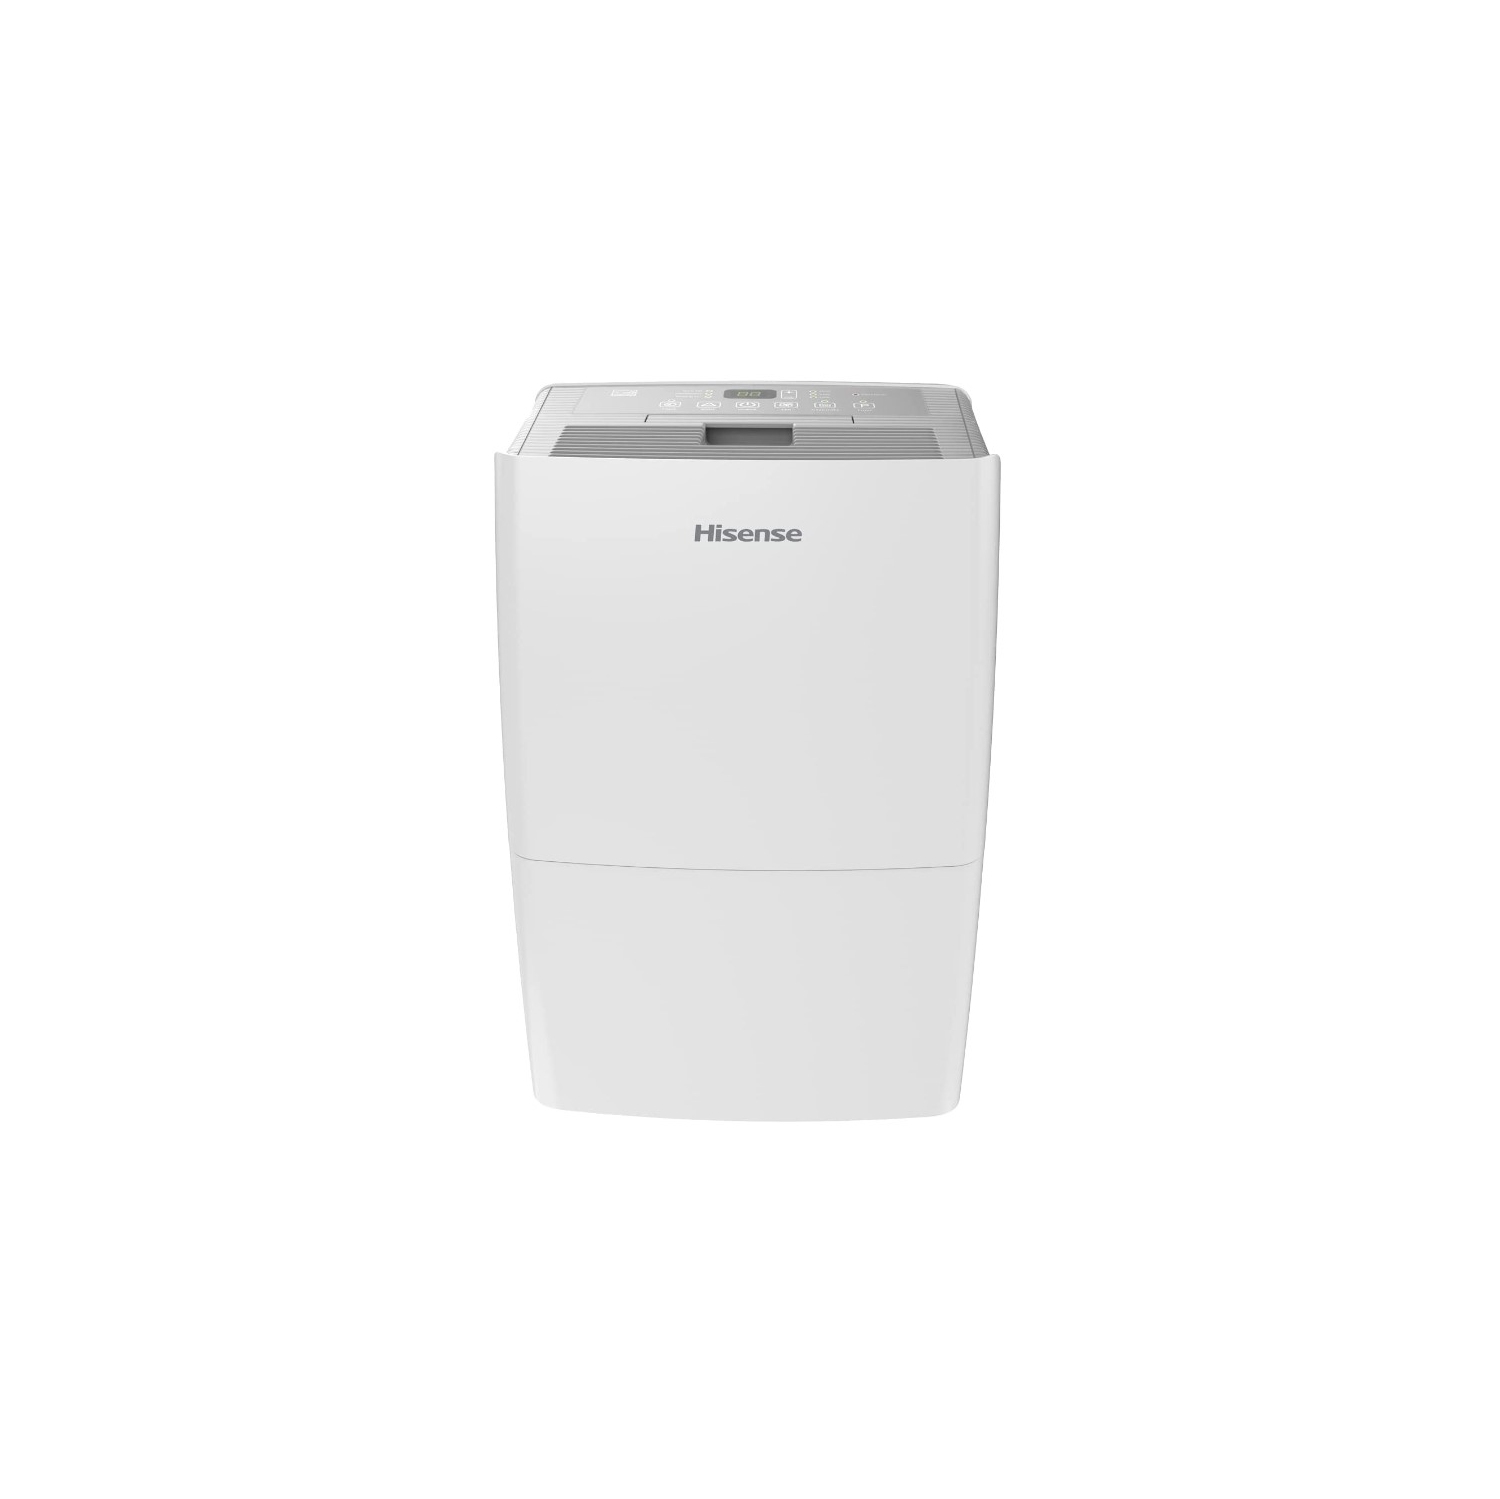 Hisense 50-Pint 2-Speed Dehumidifier with Built-In Pump ENERGY STAR